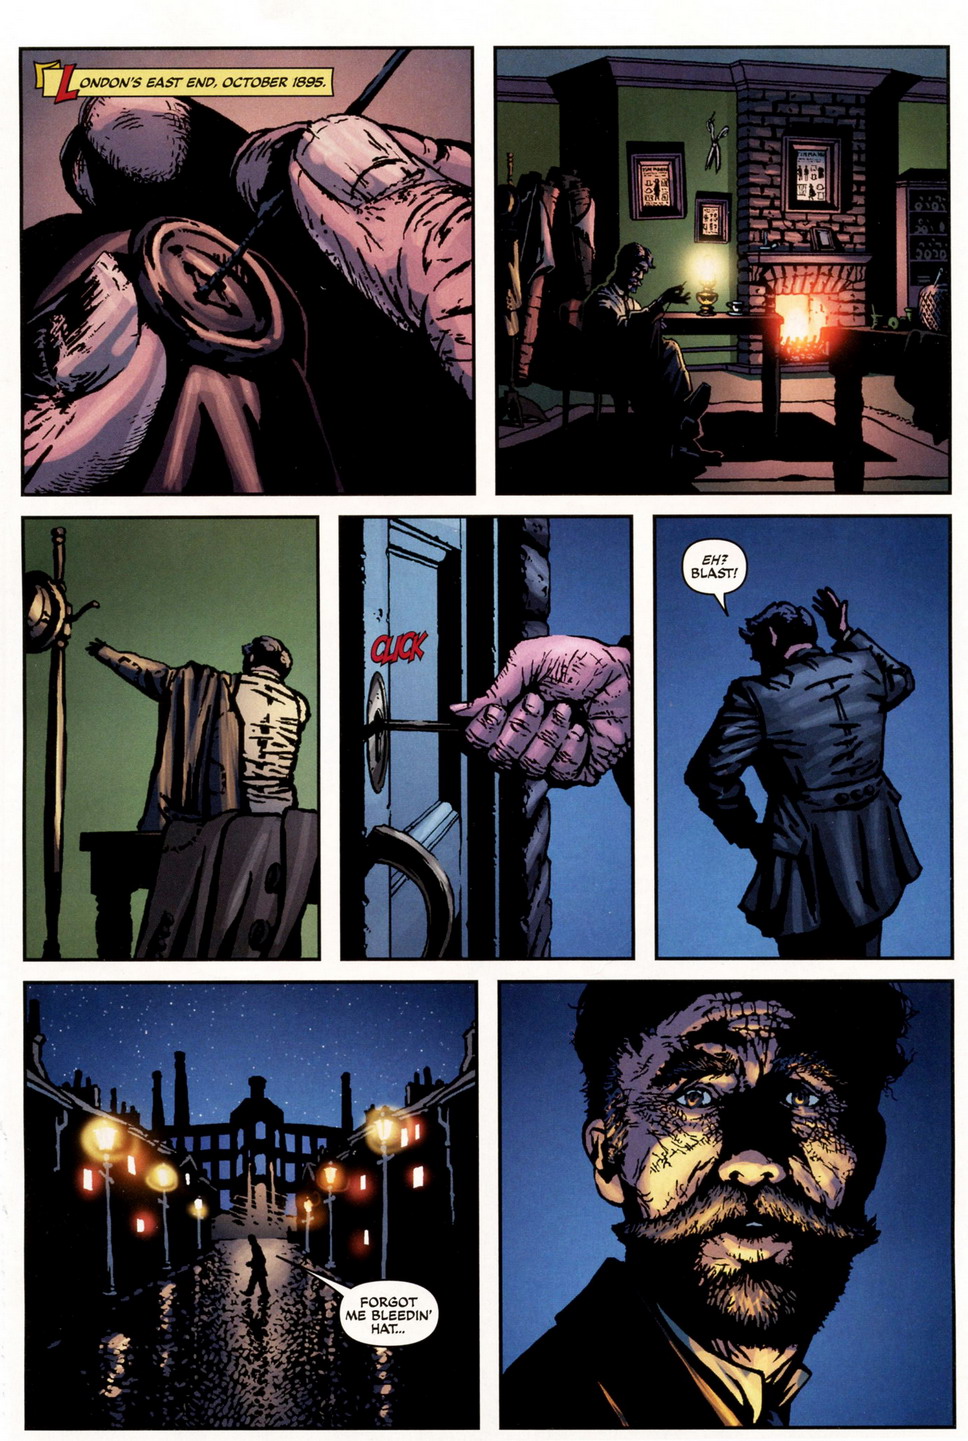 Sherlock Holmes (2009) issue 1 - Page 3